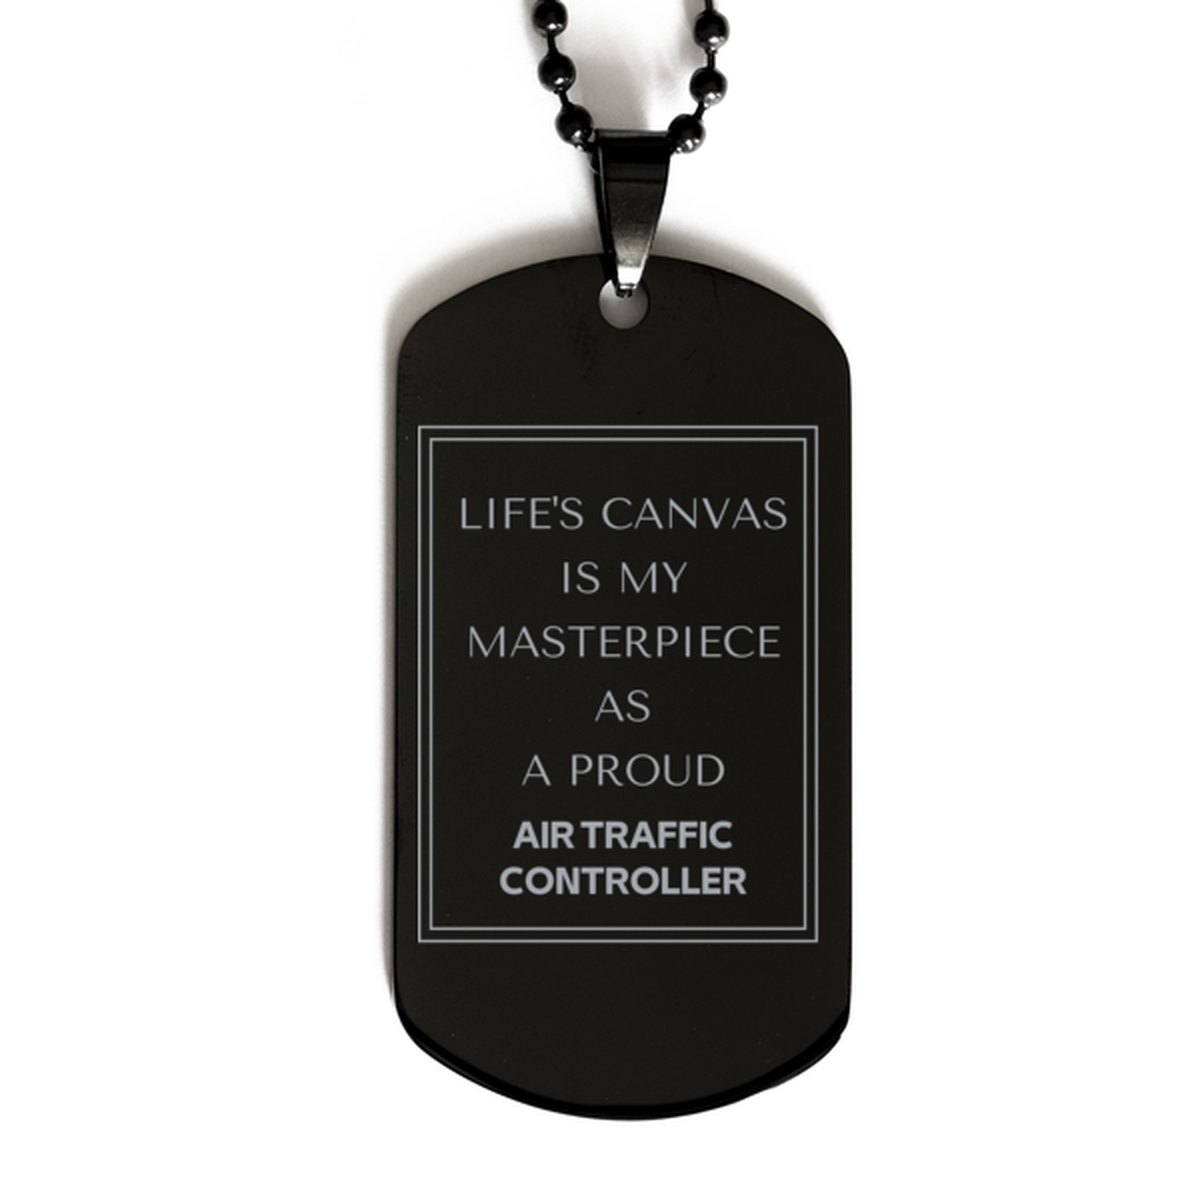 Proud Air Traffic Controller Gifts, Life's canvas is my masterpiece, Epic Birthday Christmas Unique Black Dog Tag For Air Traffic Controller, Coworkers, Men, Women, Friends